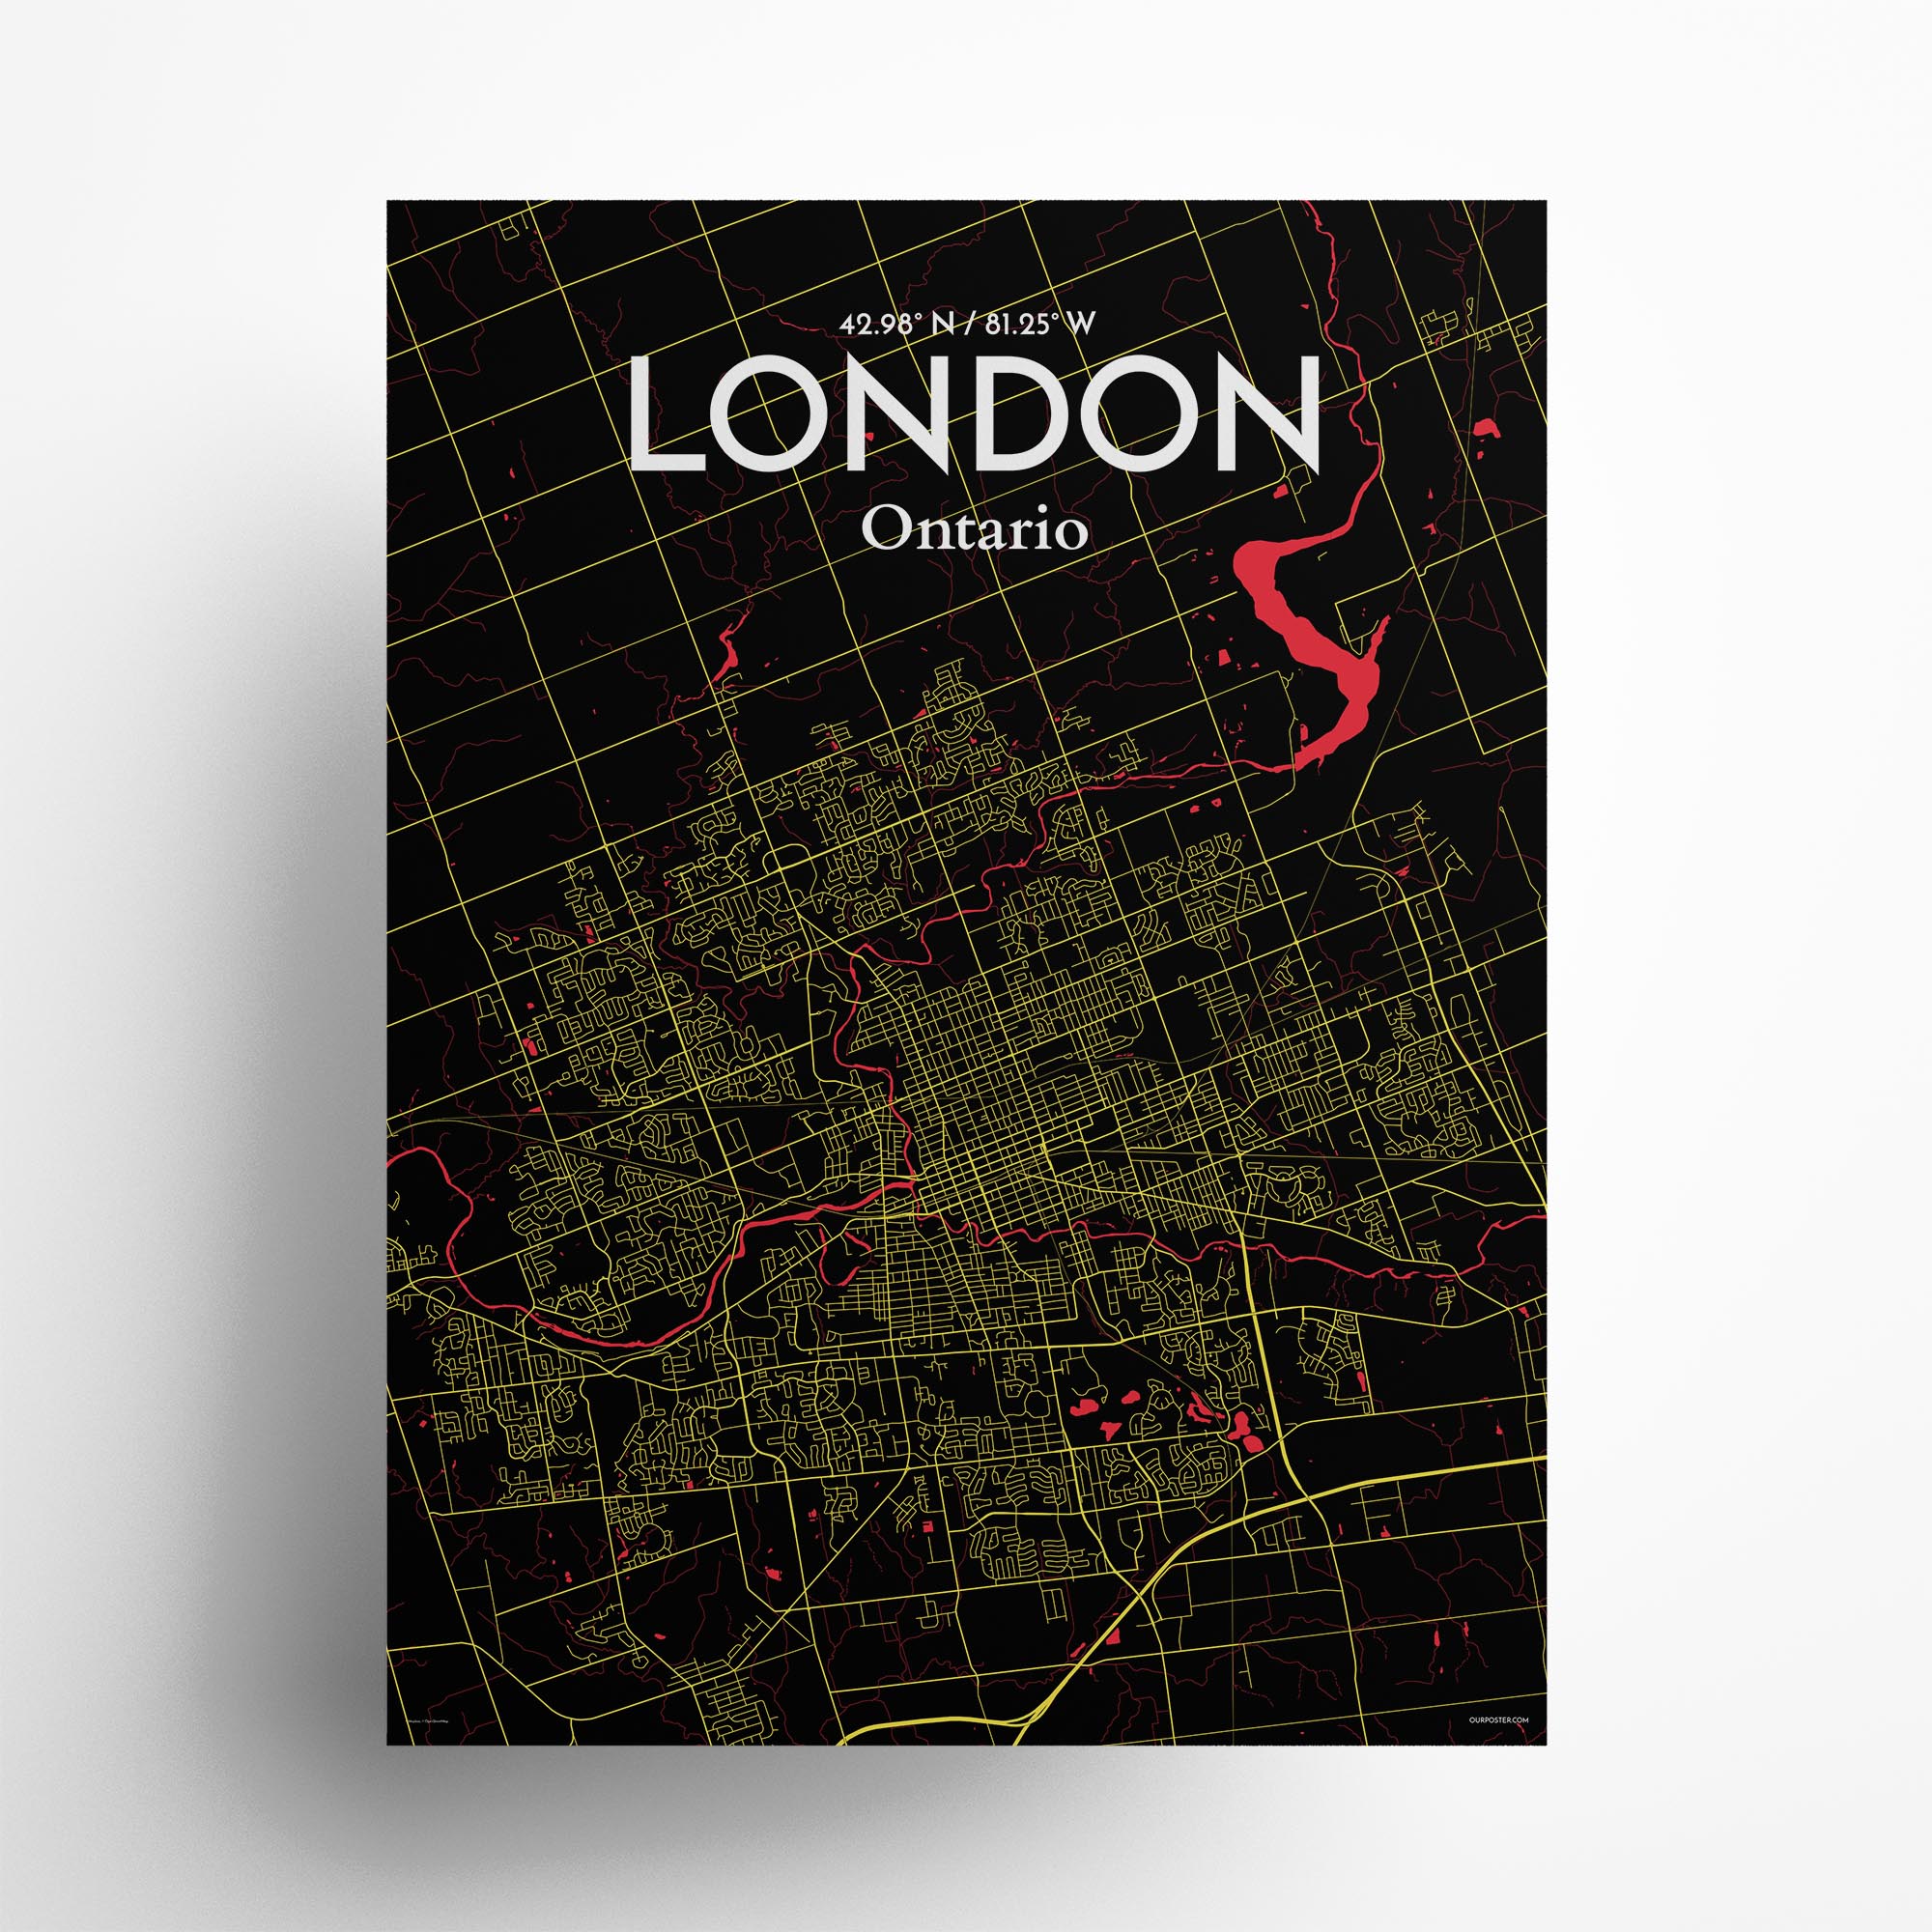 London city map poster in Contrast of size 18" x 24"